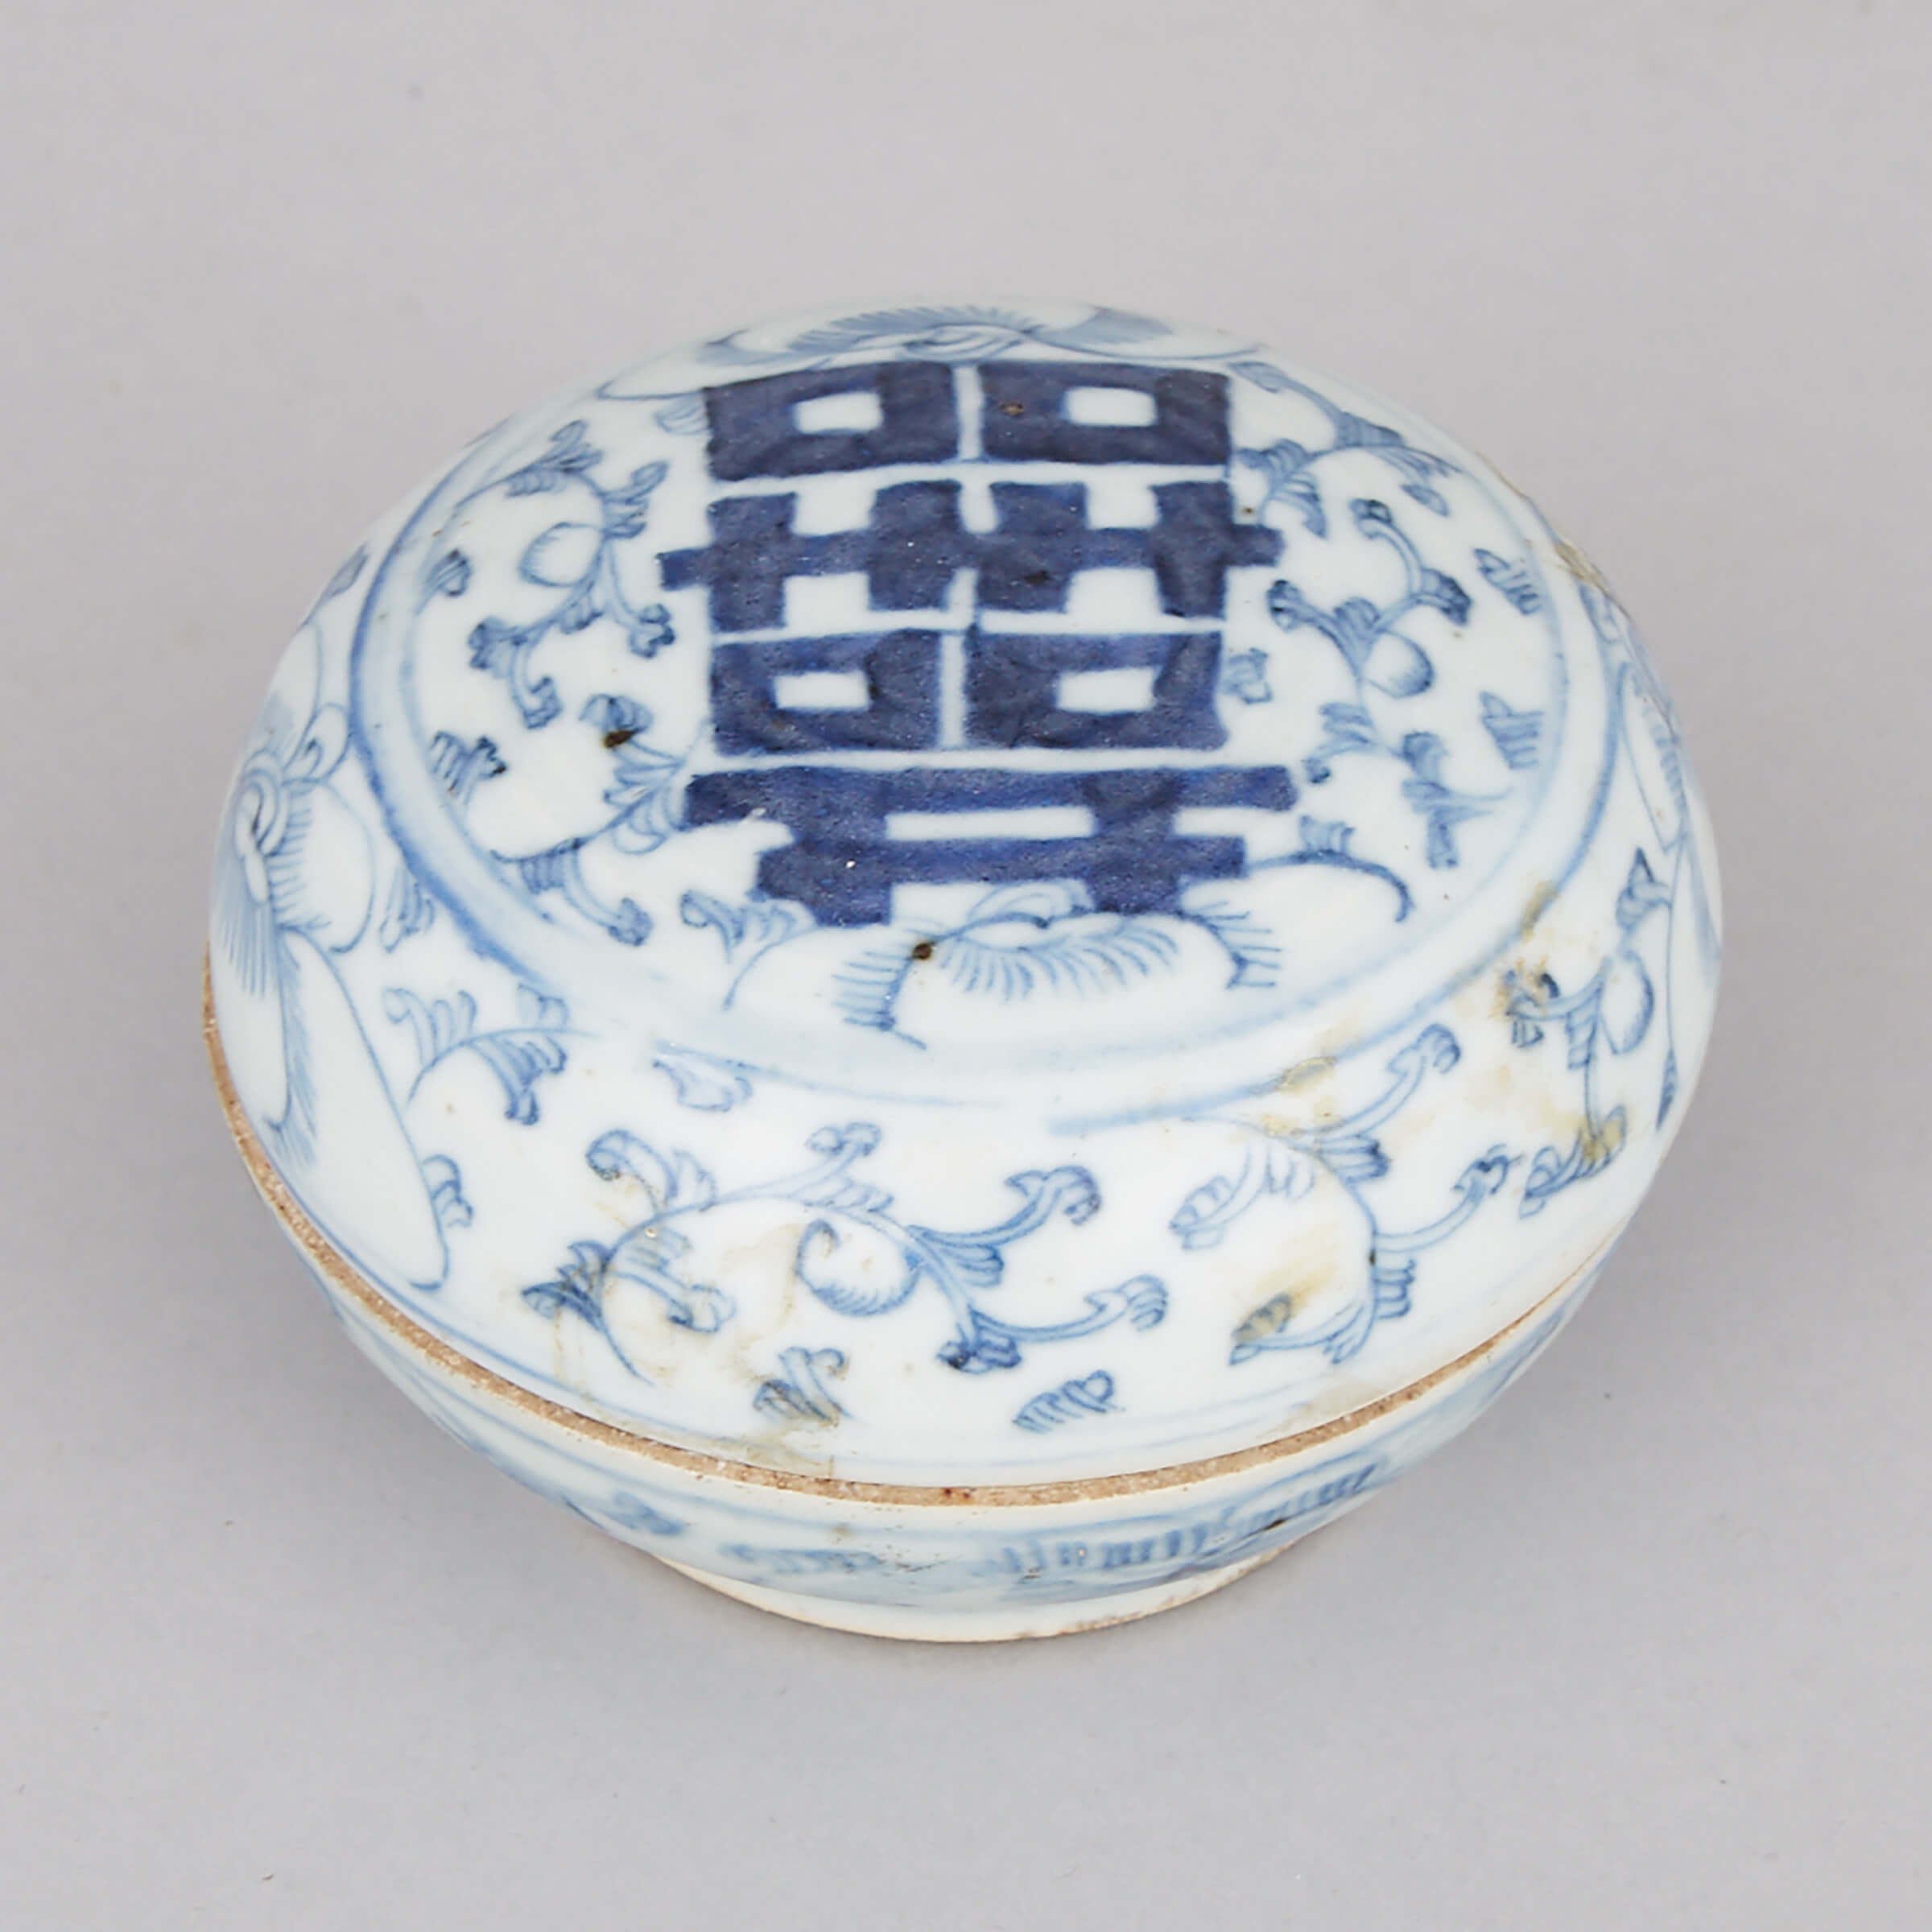 A Blue and White ‘Double Happiness’  Porcelain Paste Box, 19th Century